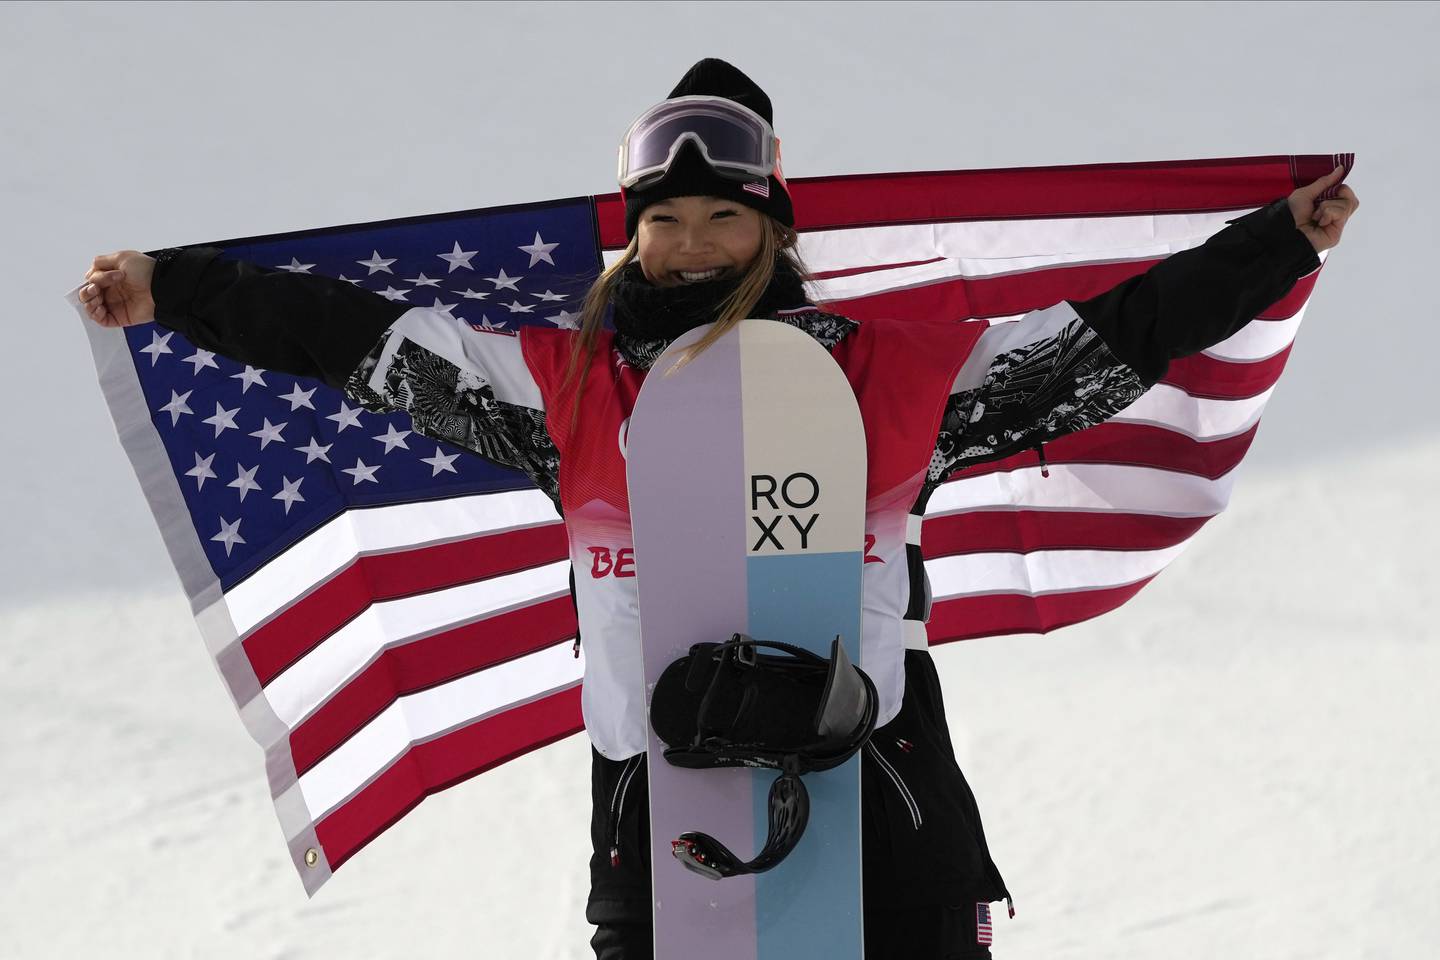 Chloe Kim celebrates during the venue ceremony for the women's halfpipe at the 2022 Winter Olympics on Feb. 10, 2022.